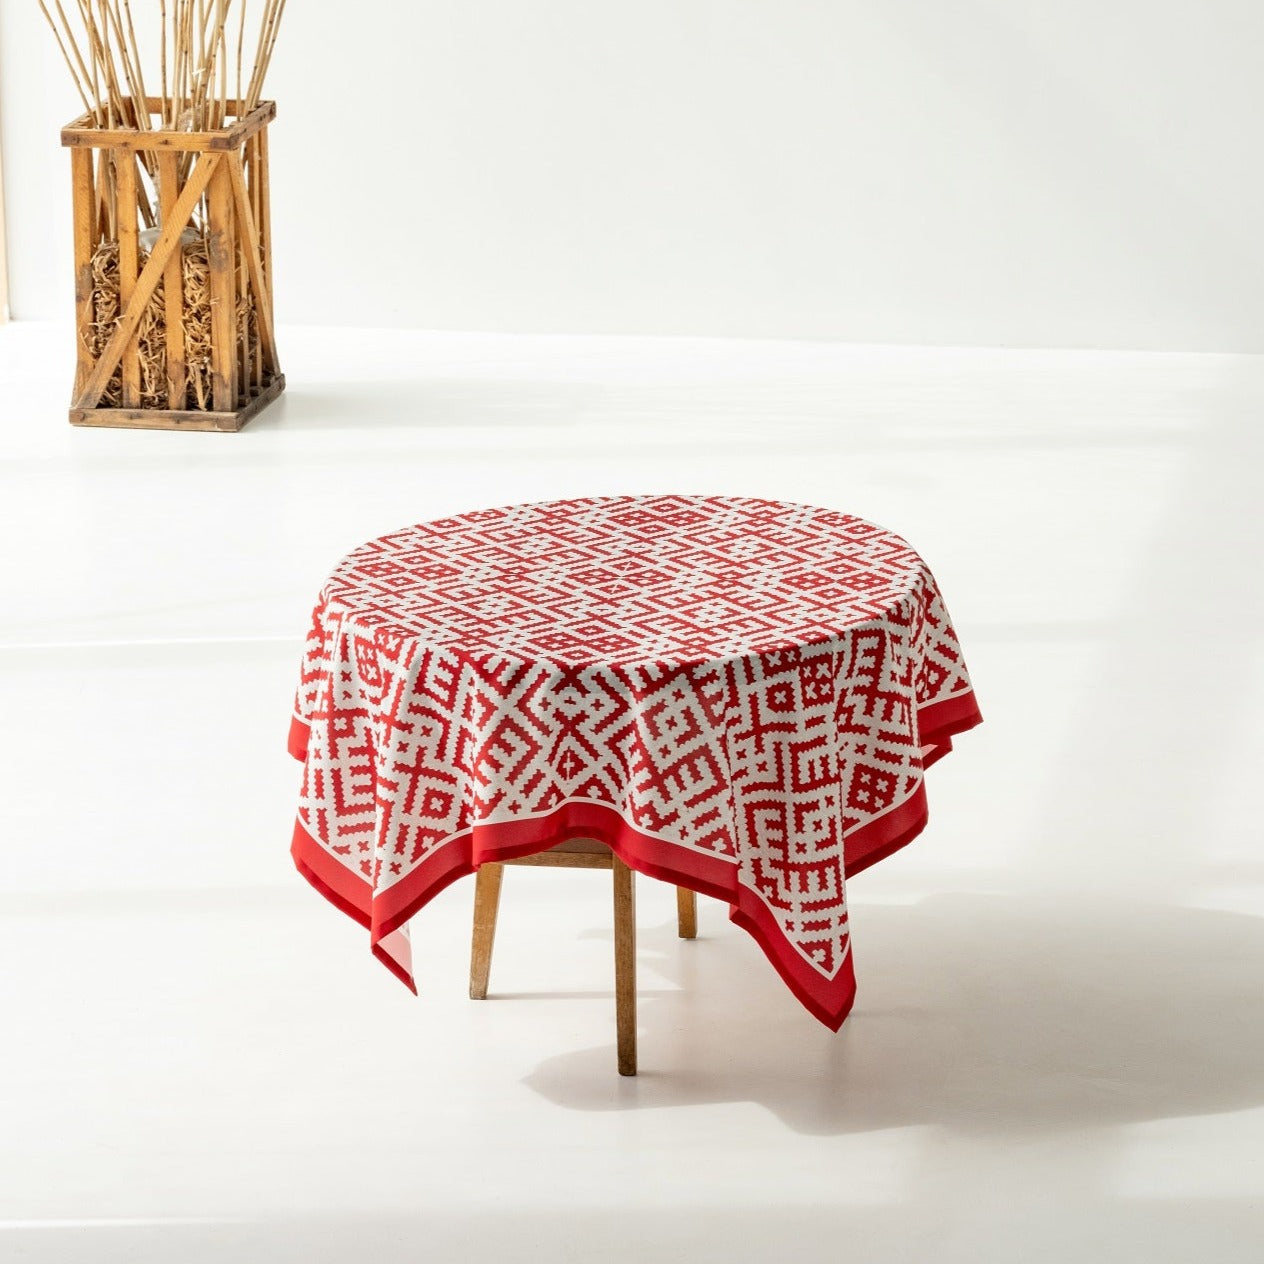 Table cloth made of recycled fabric Rašti river 116